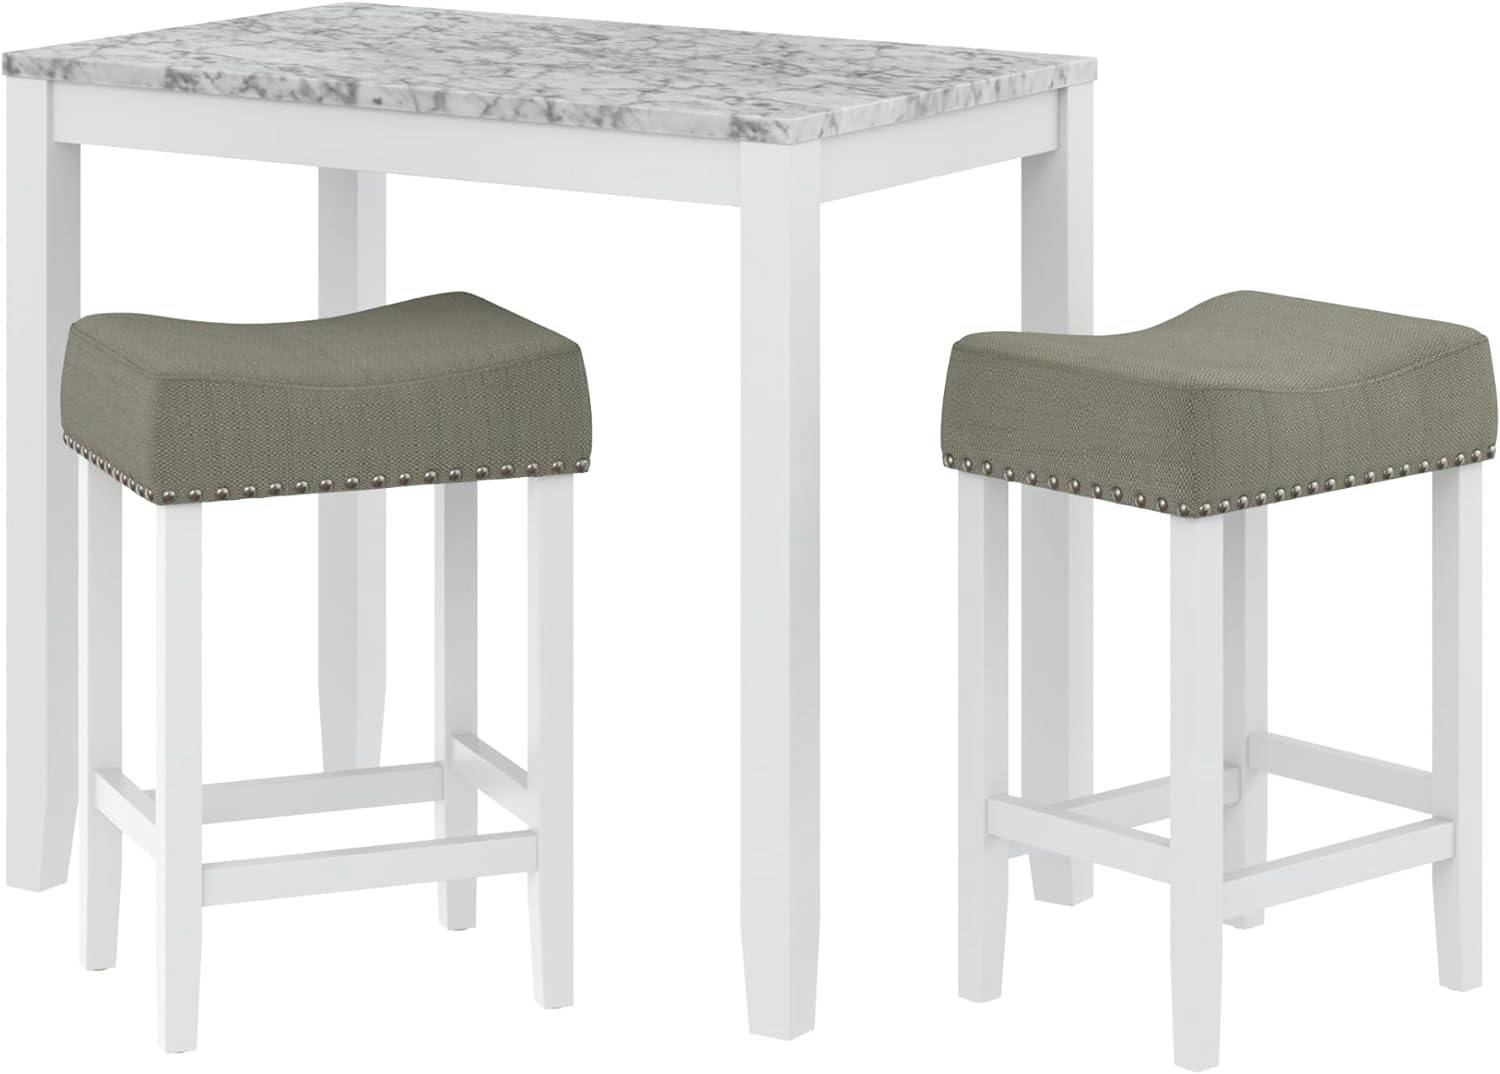 Elegant Marble-Top Bistro Dining Set with Light Gray Fabric Chairs